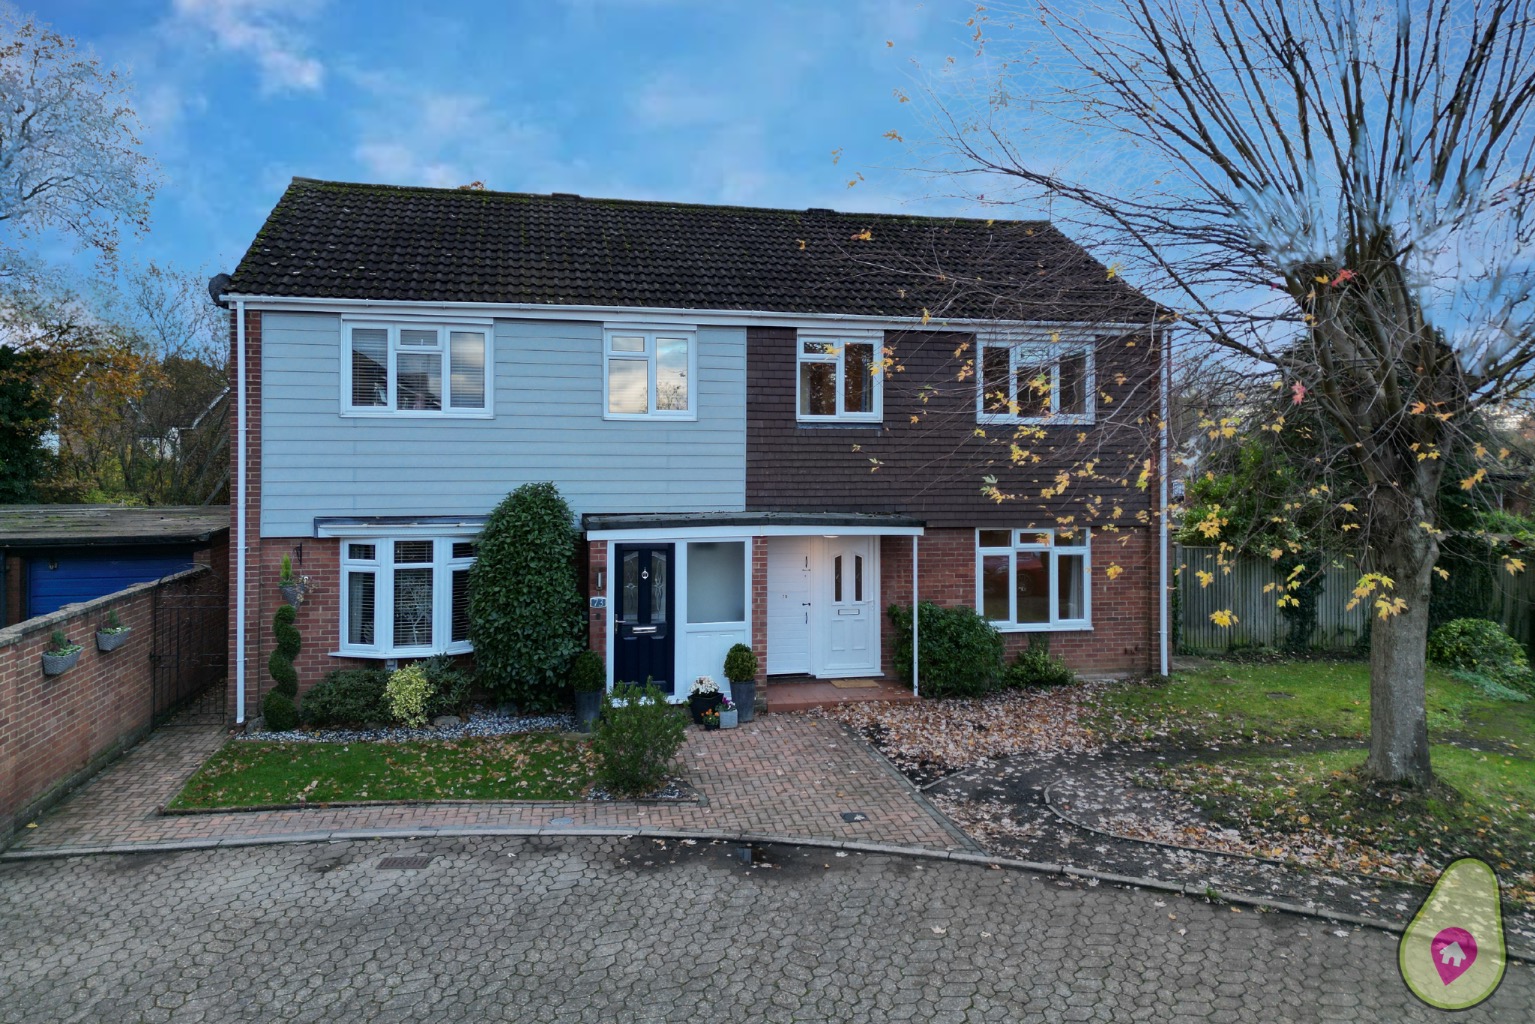 3 bed semi-detached house for sale in Chatsworth Avenue, Wokingham  - Property Image 1